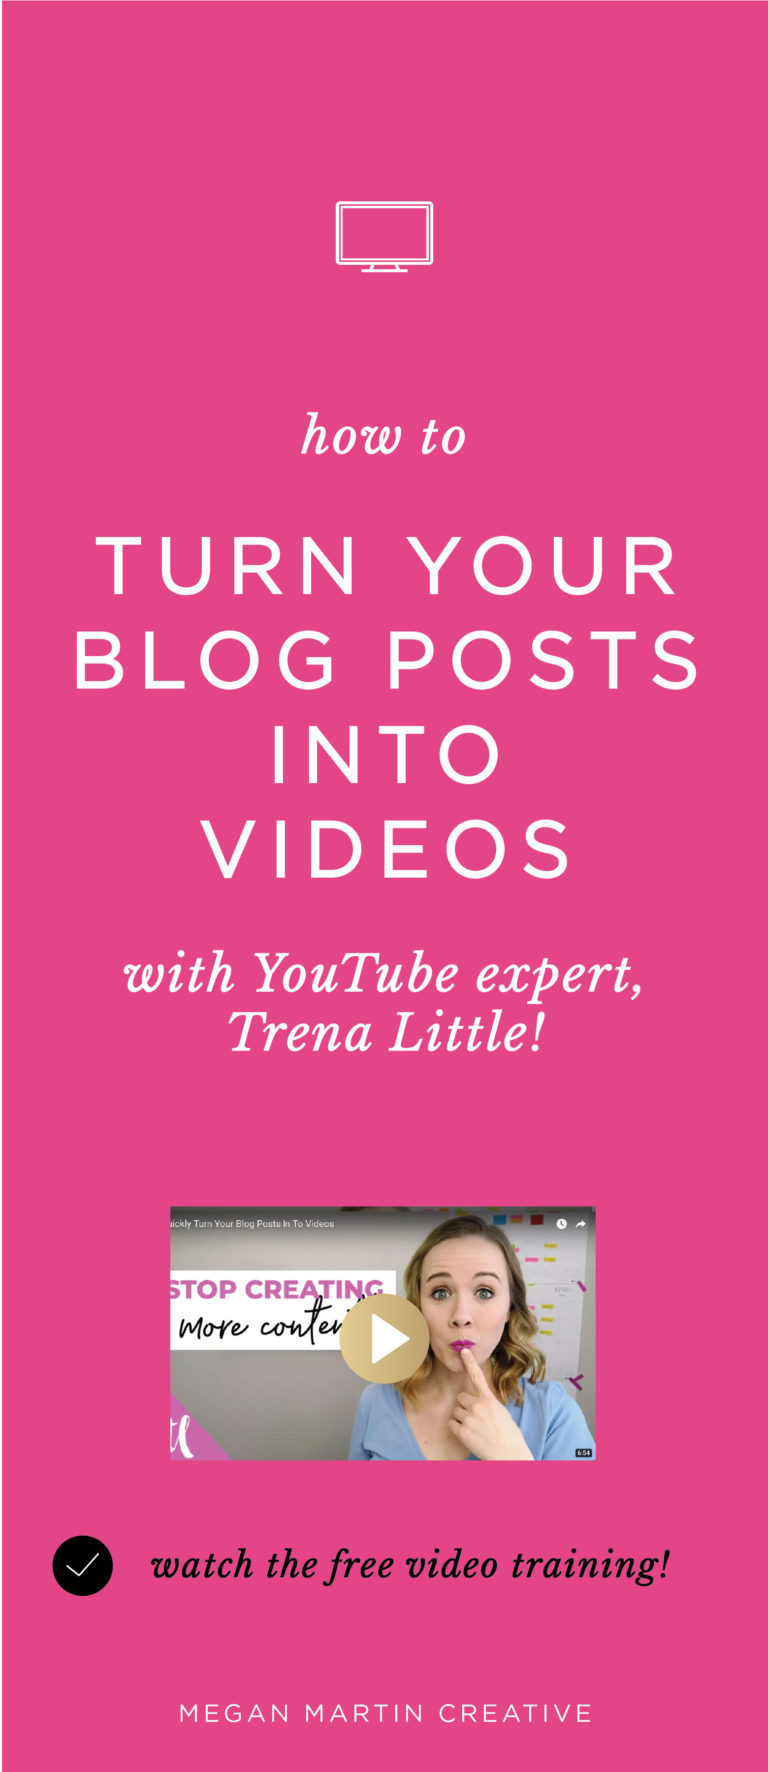 How To Turn Your Blog Posts Into Videos The Easy Way Megan Martin Creative Education And 8854